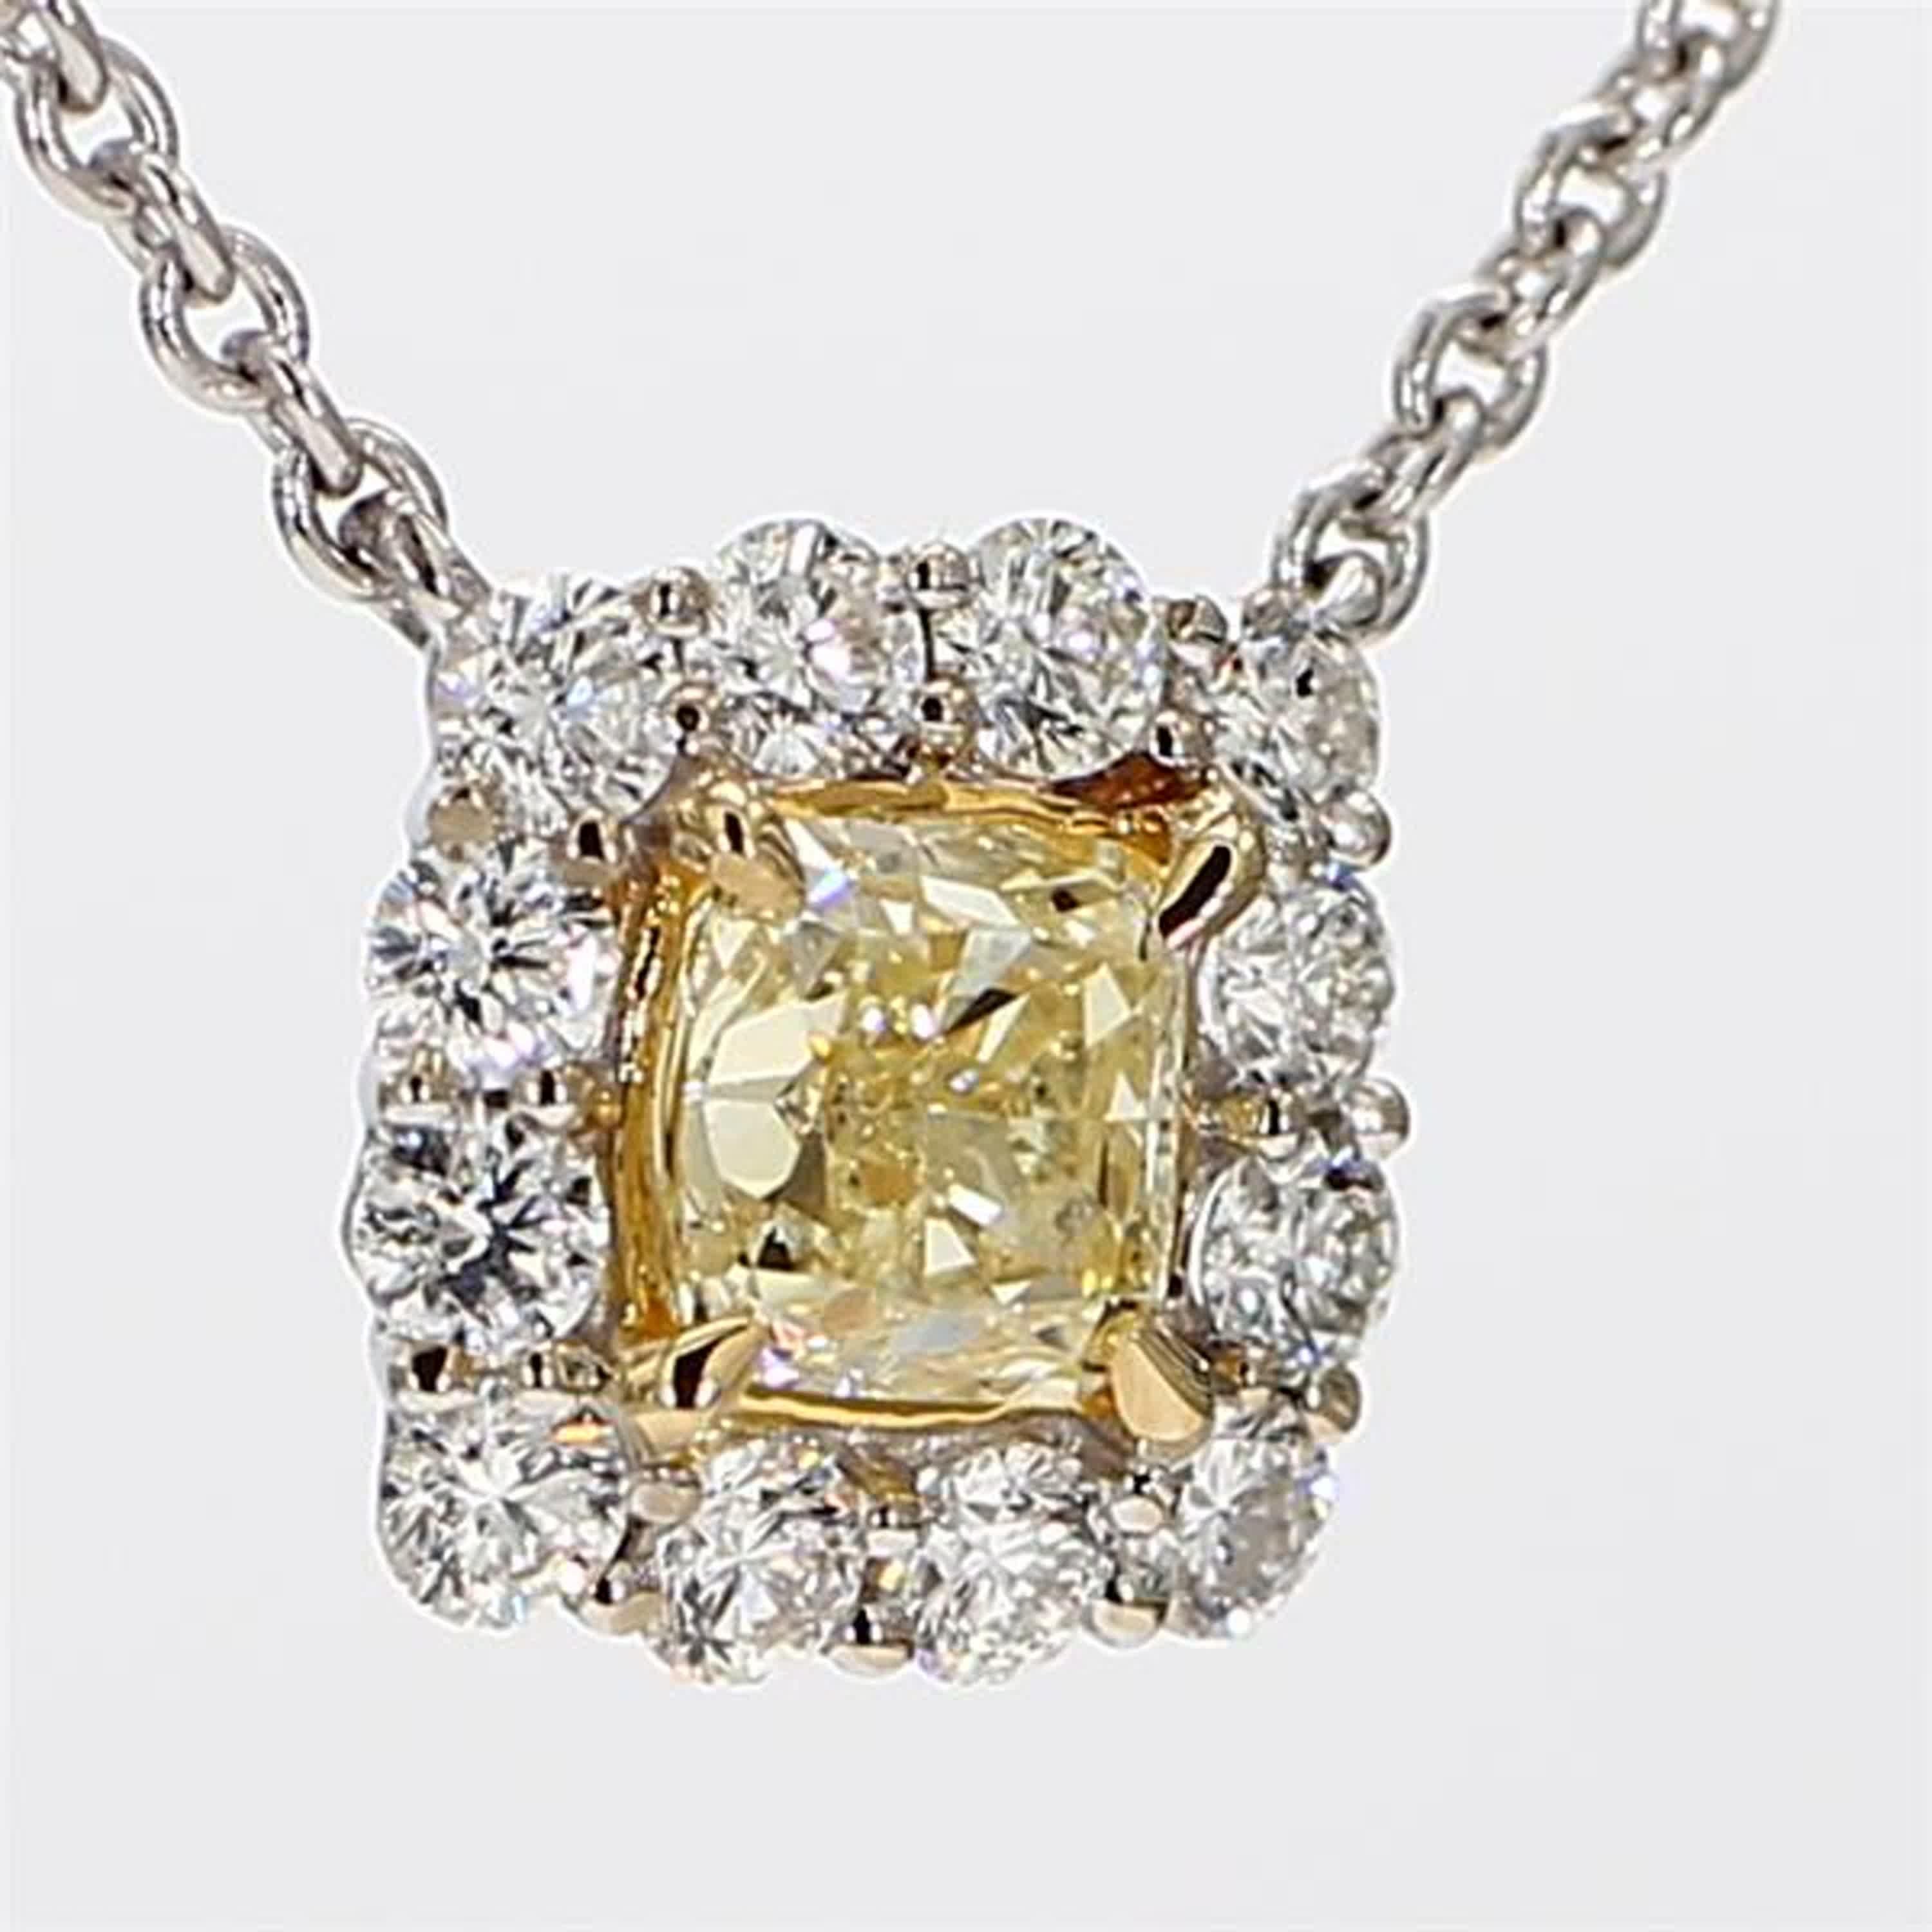 Natural Yellow Cushion and White Diamond 1.45 Carat TW Gold Drop Pendant For Sale 1